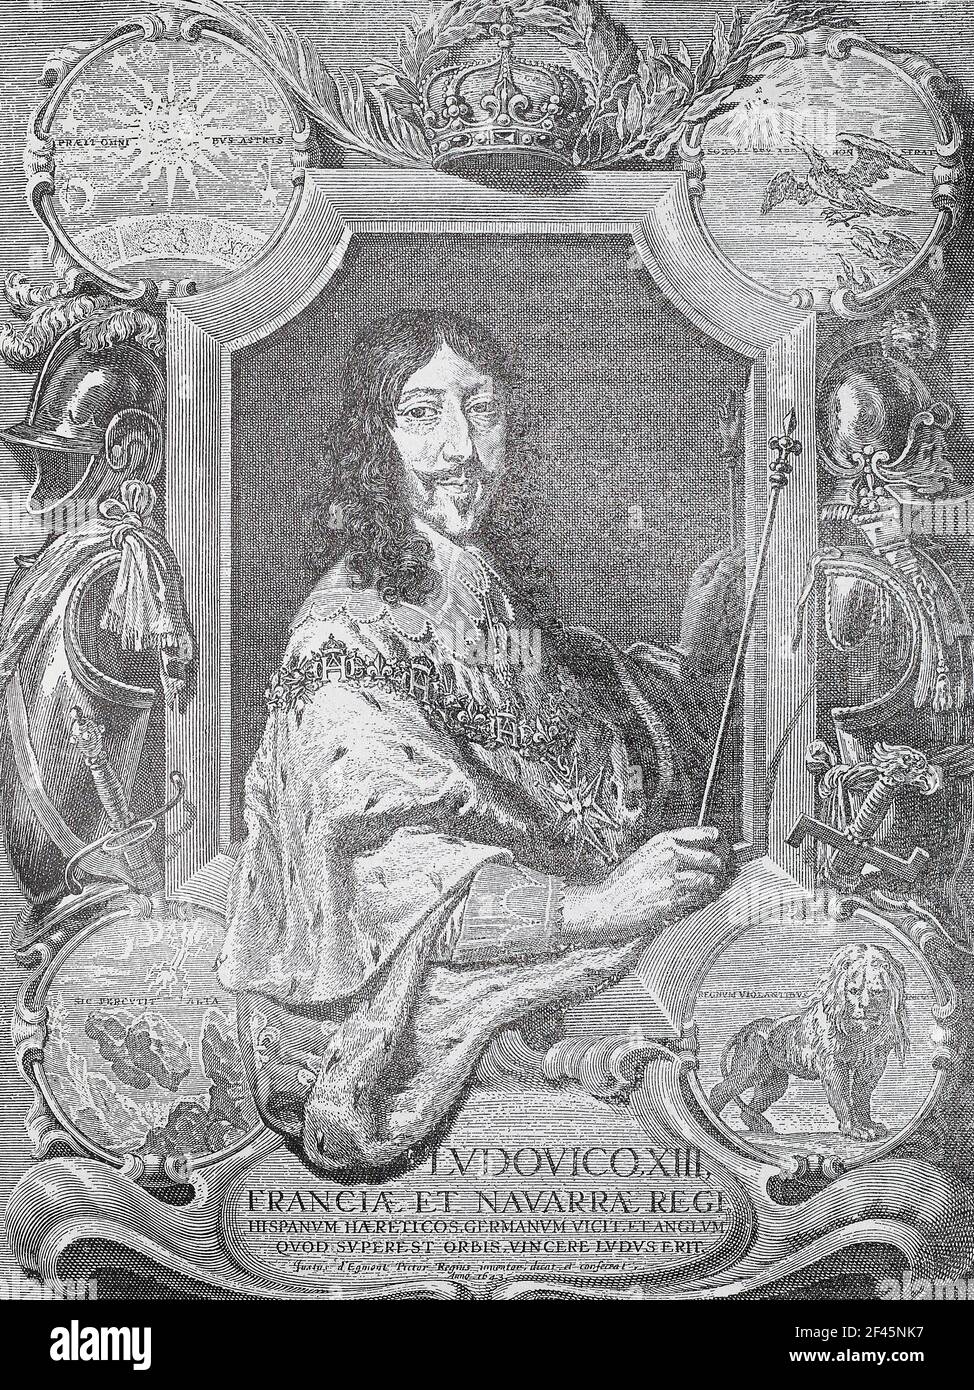 Louis XIII (1601 – 1643) was King of France from 1610 to 1643 and King of Navarre (as Louis II) from 1610 to 1620, when the crown of Navarre was merged with the French crown. Stock Photo